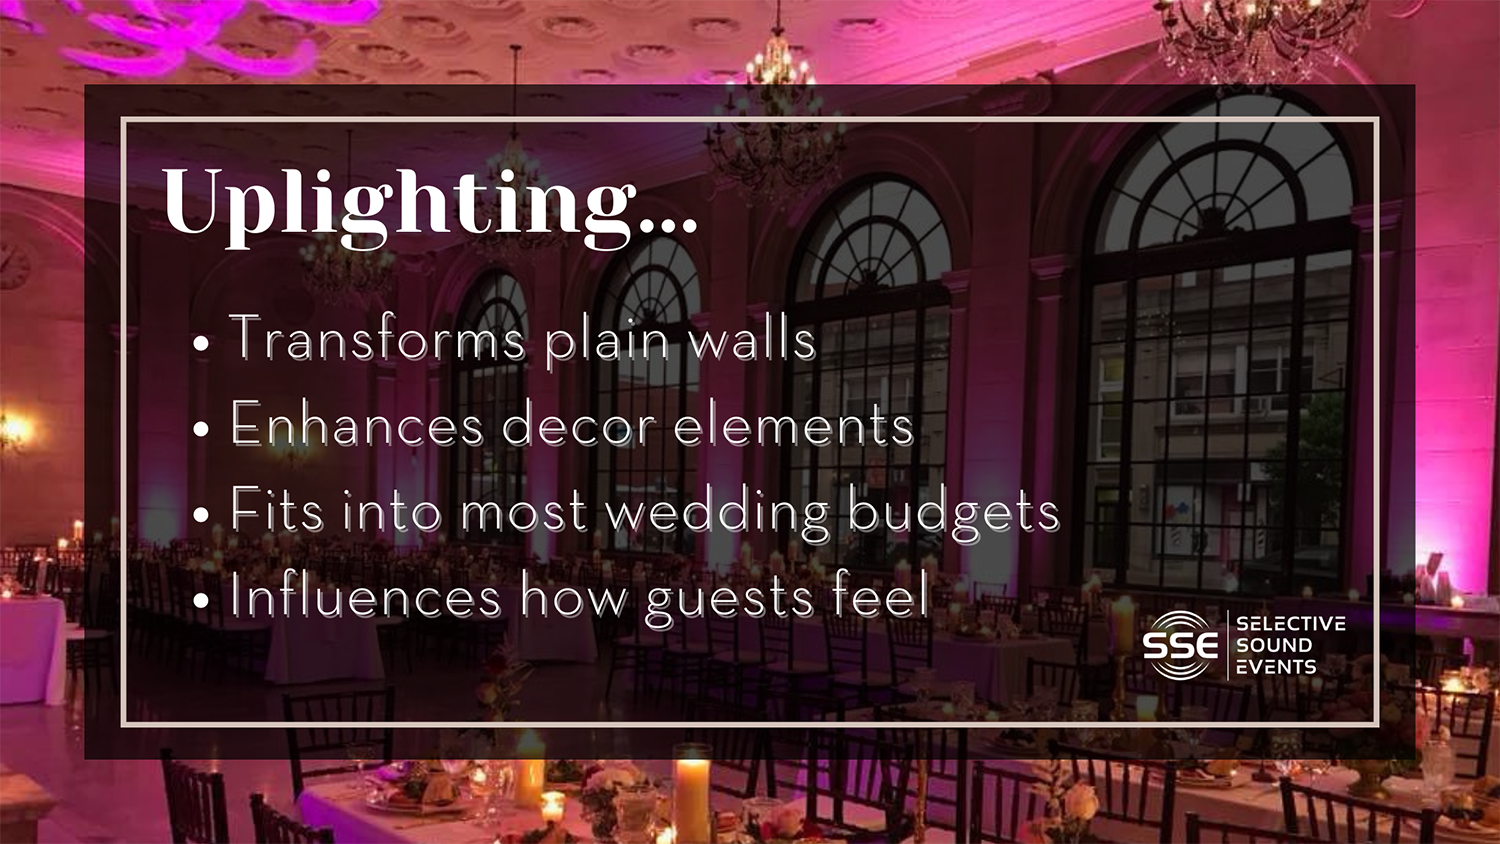 Graphic sharing features of wedding uplighting